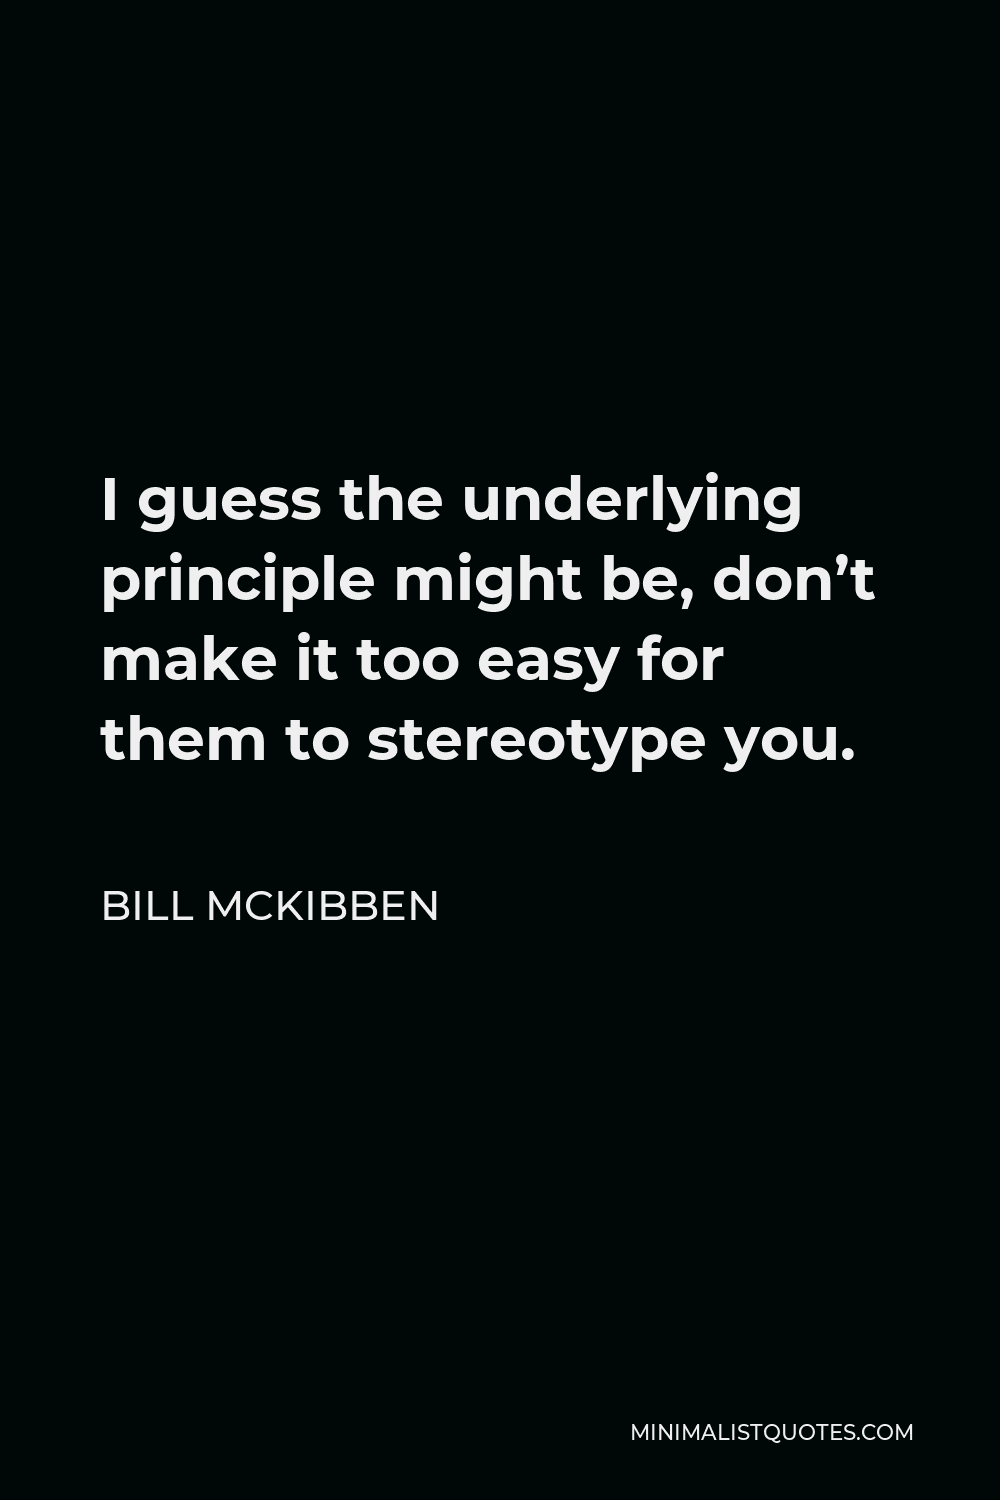 Bill McKibben Quote - I guess the underlying principle might be, don’t make it too easy for them to stereotype you.